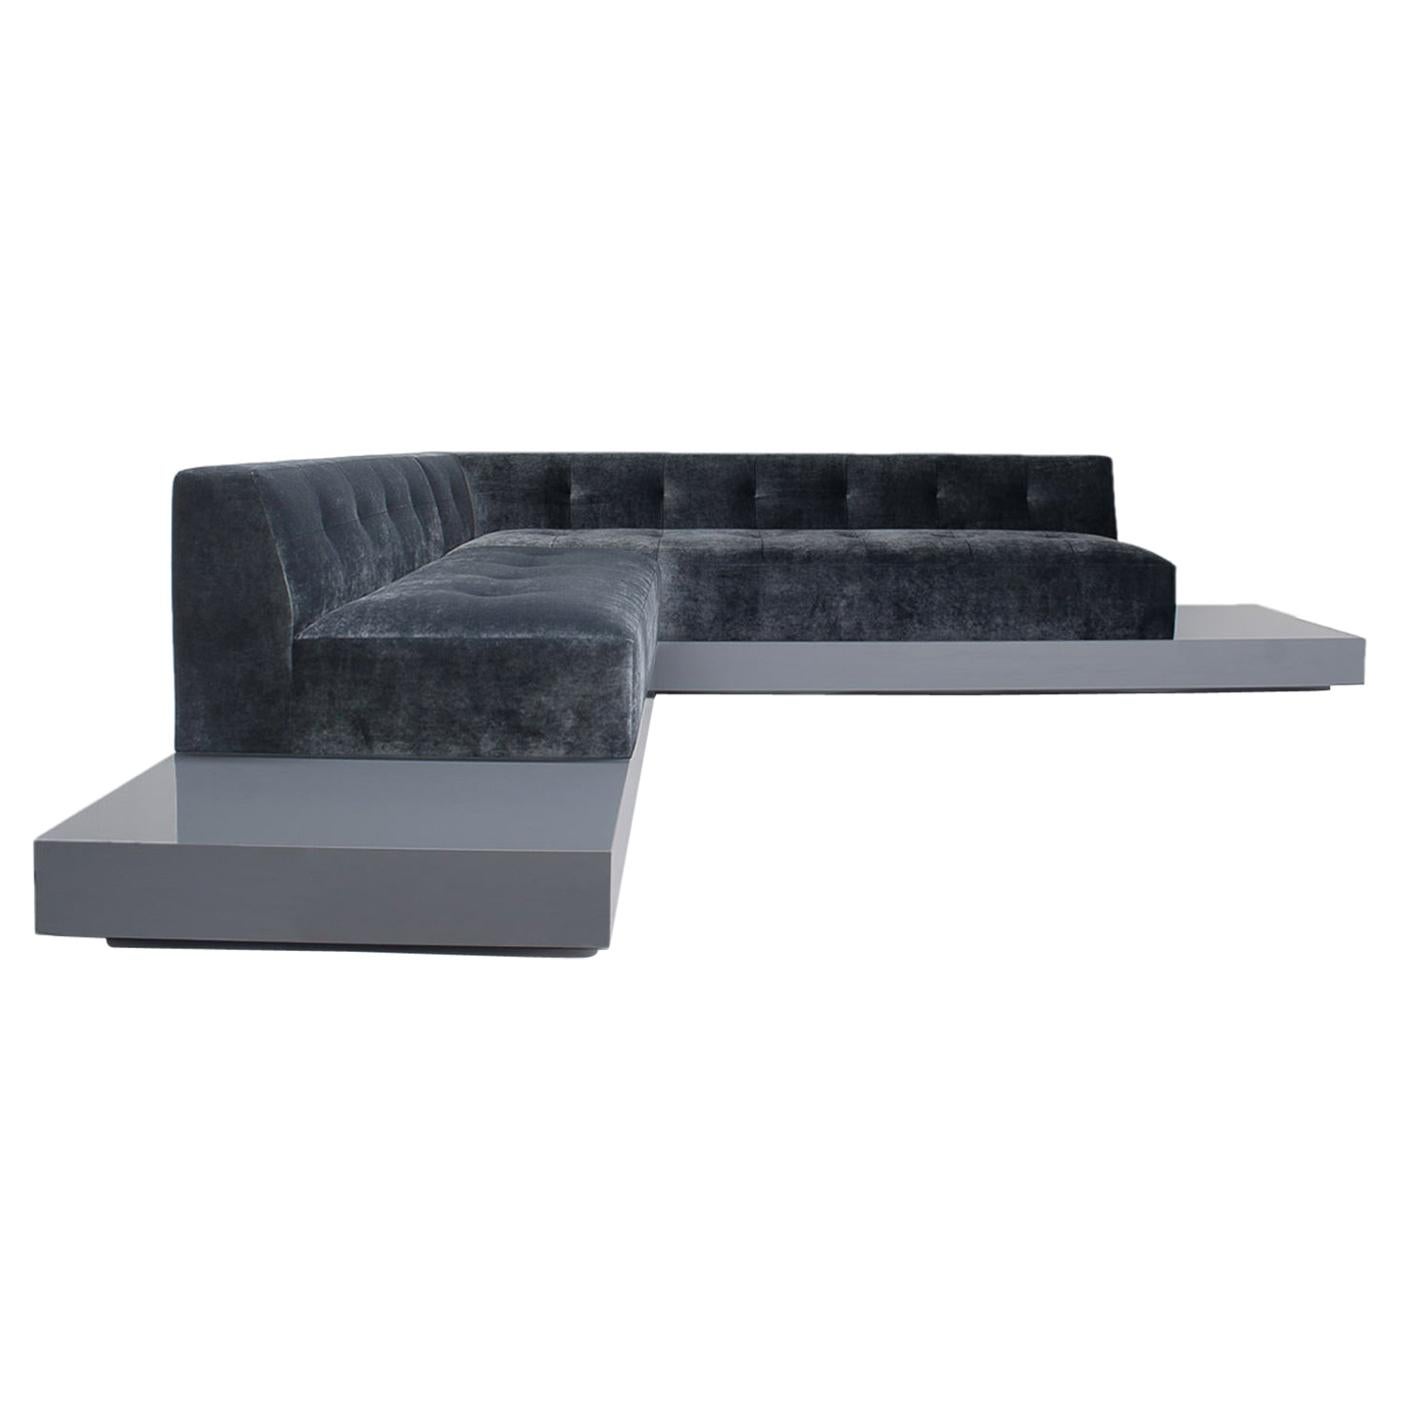 Lizo Sectional-Tight Seat & Back, Lacquer Base, Pull Tufting, Storage, Upholster